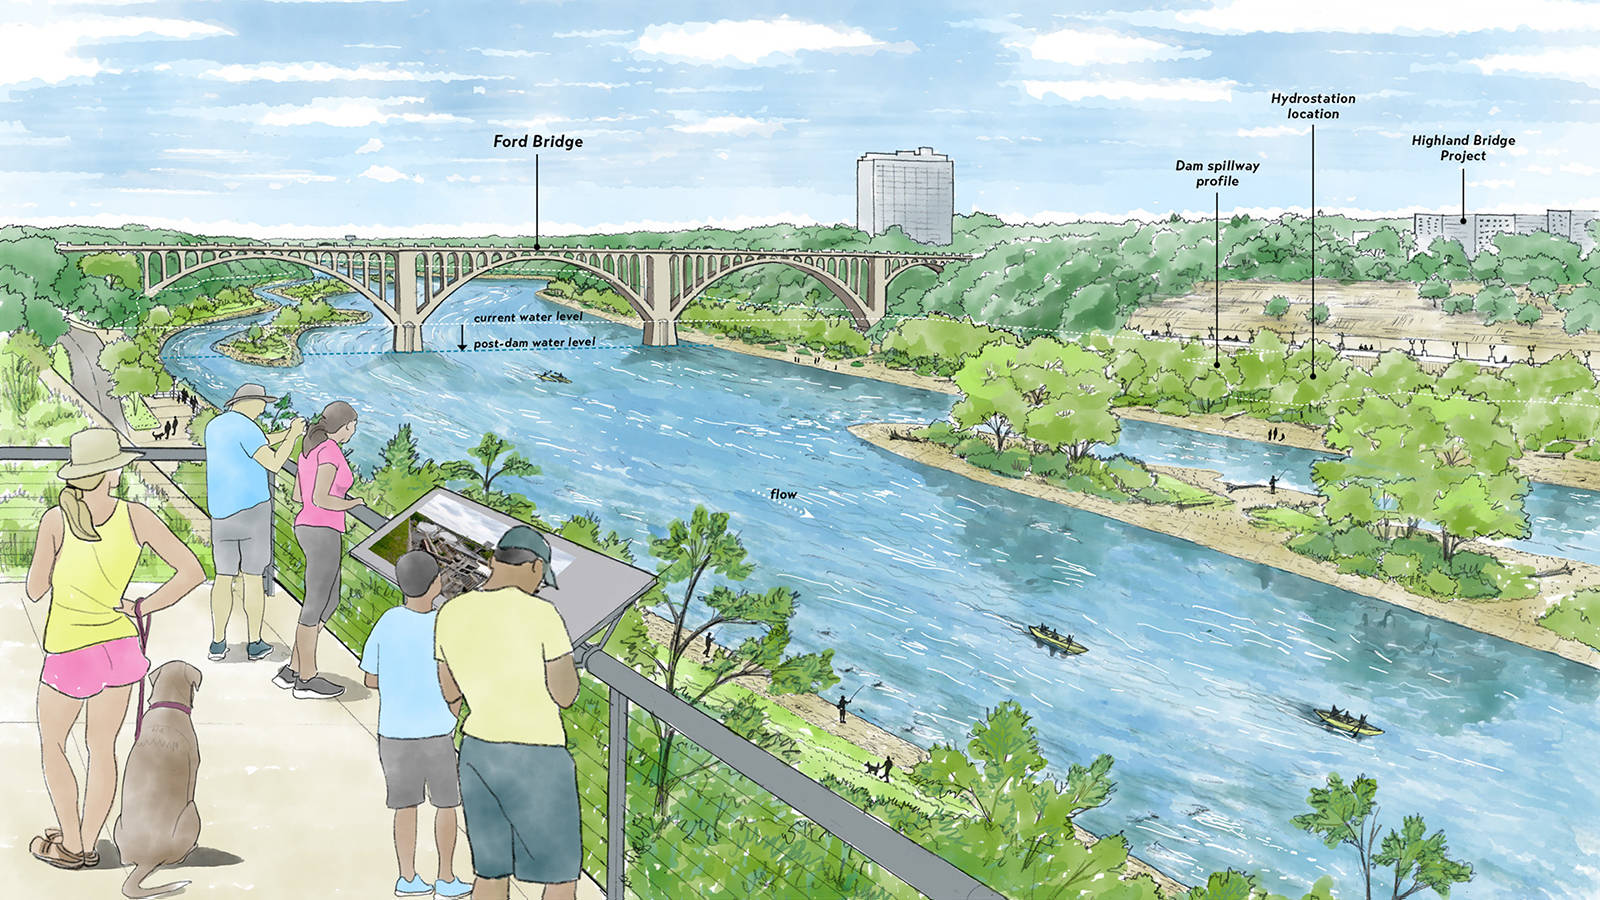 <p>Rendering of Mississippi River at Ford Parkway Bridge. Without the lock &amp; dam, the river would drop 38 feet. Many islands could form between here and upstream toward the Lake St./Marshall Ave. Bridge. New recreational uses could increase, especially as the river water levels fall. </p>